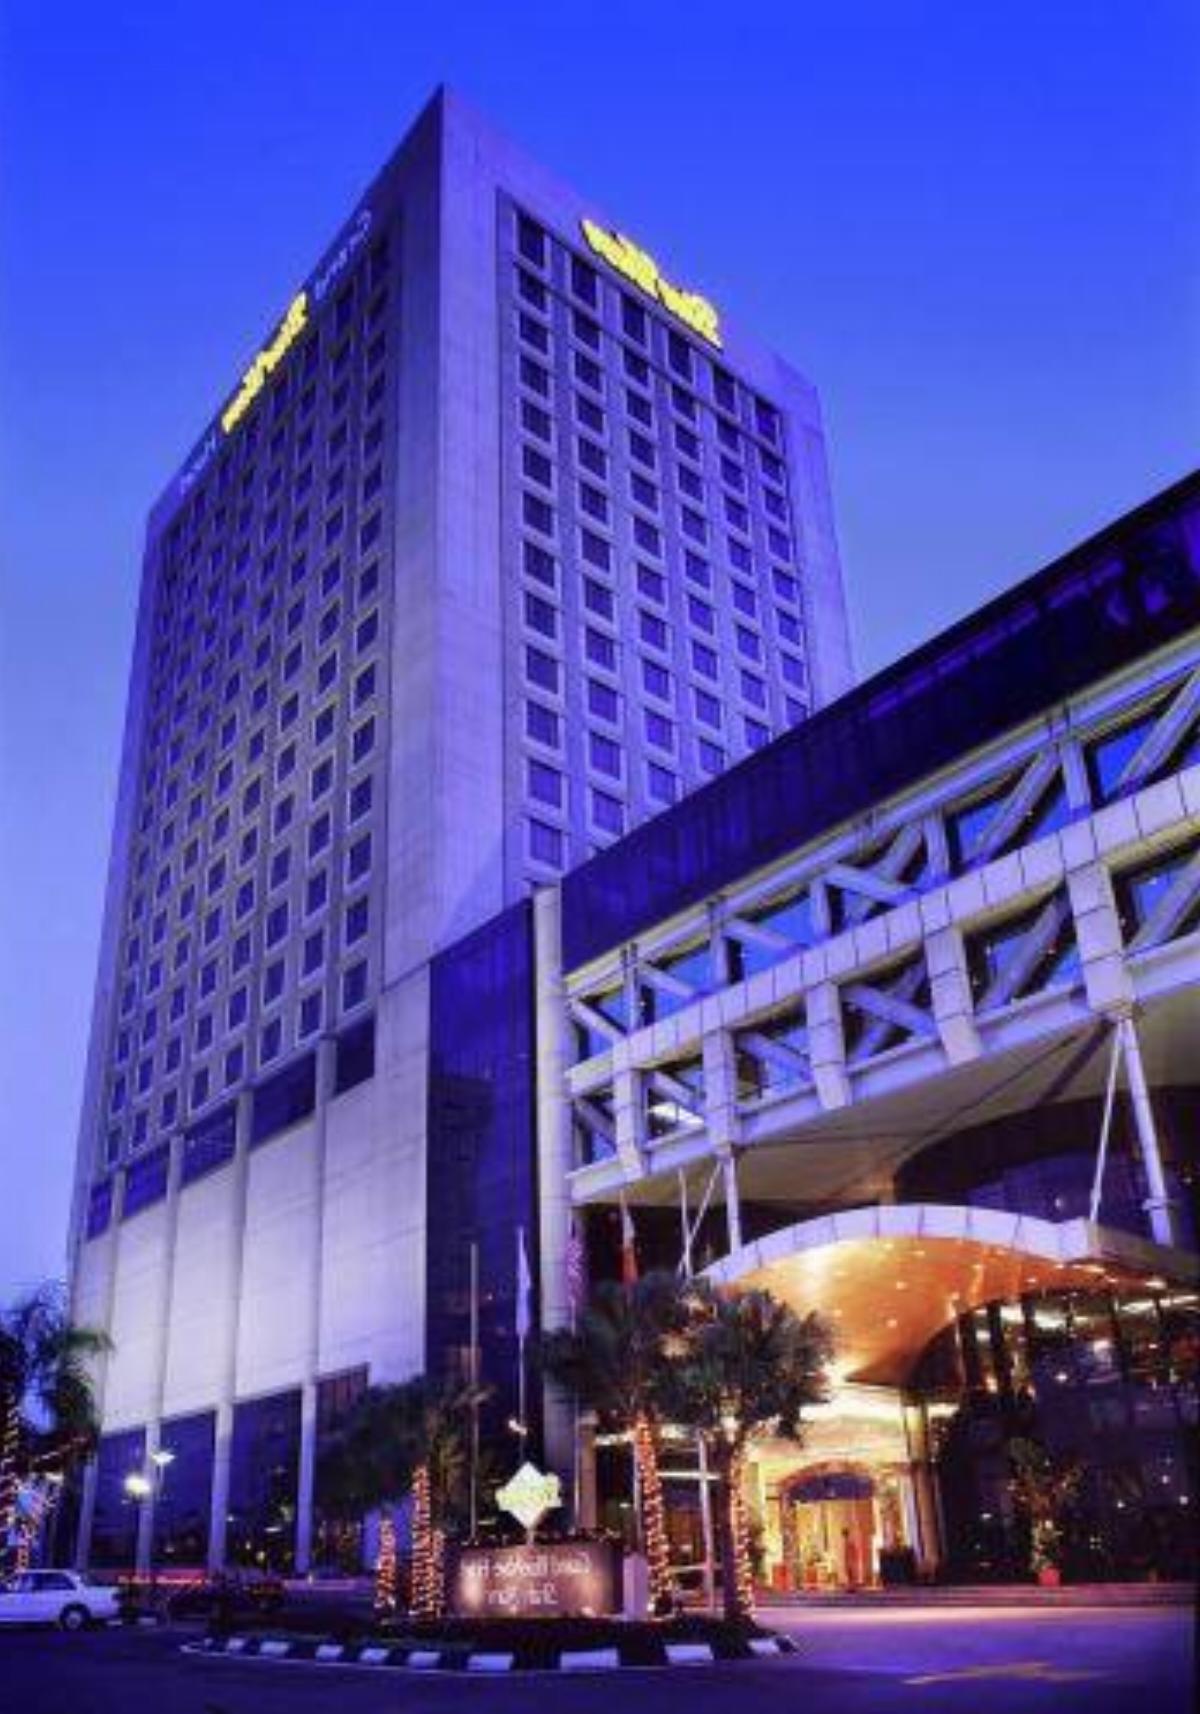 Shah Alam, Malaysia Hotels, 360 Hotels in Shah Alam, Hotel Reservation